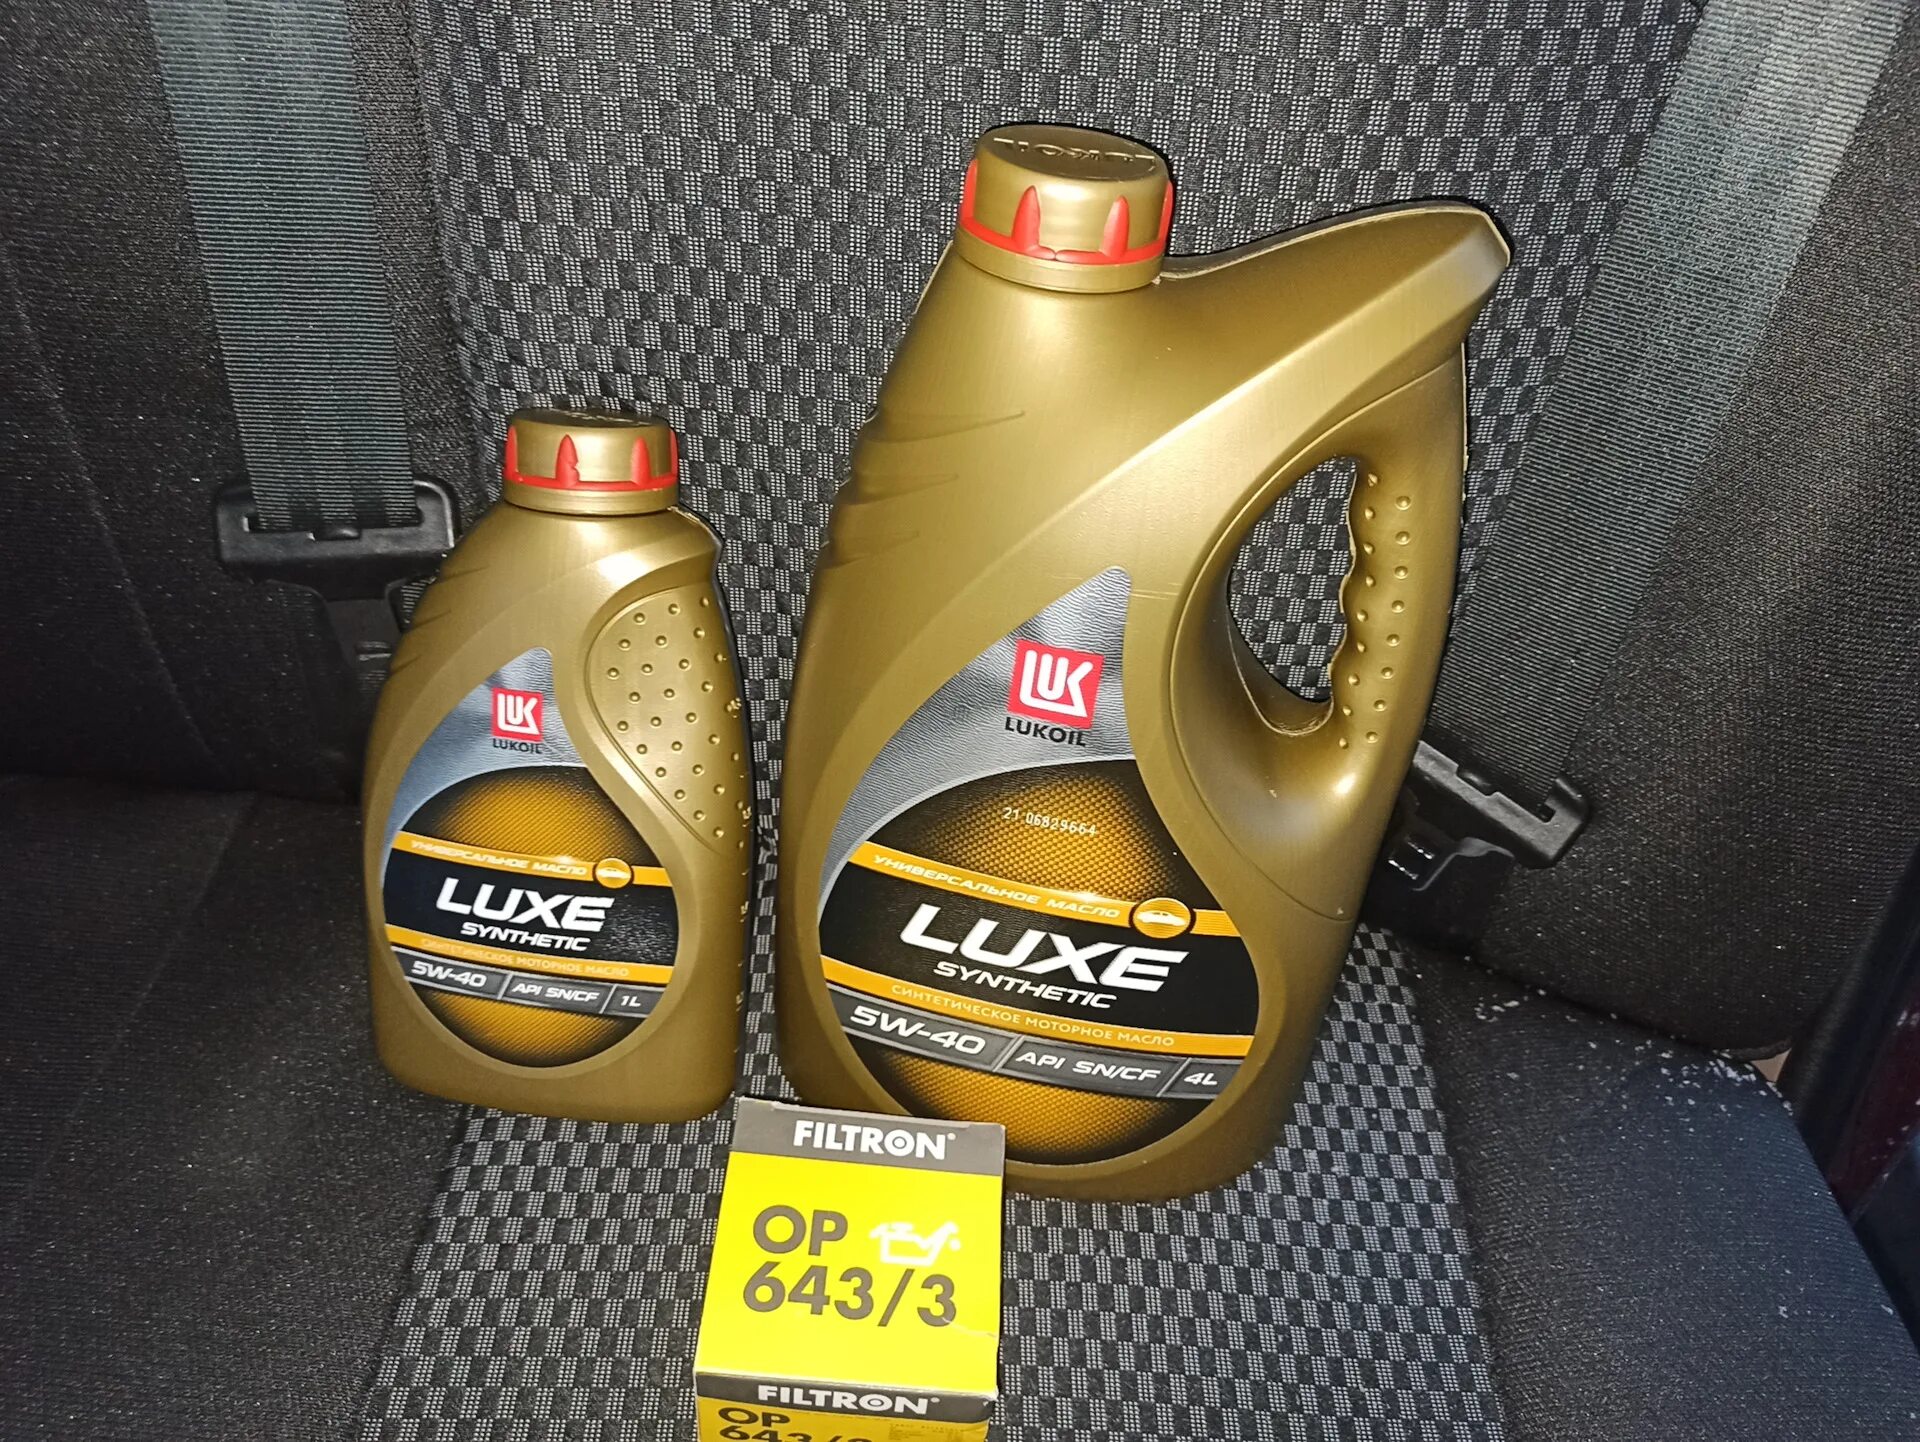 Лукойл Люкс 5w40 SN/CF. Рено Логан 1 1.6 Lukoil Luxe. Масло Лукойл Люкс 5w40 в Рено Логан 2. Масло моторное 5w40 для Рено Логан. Рено логан масло лукойл